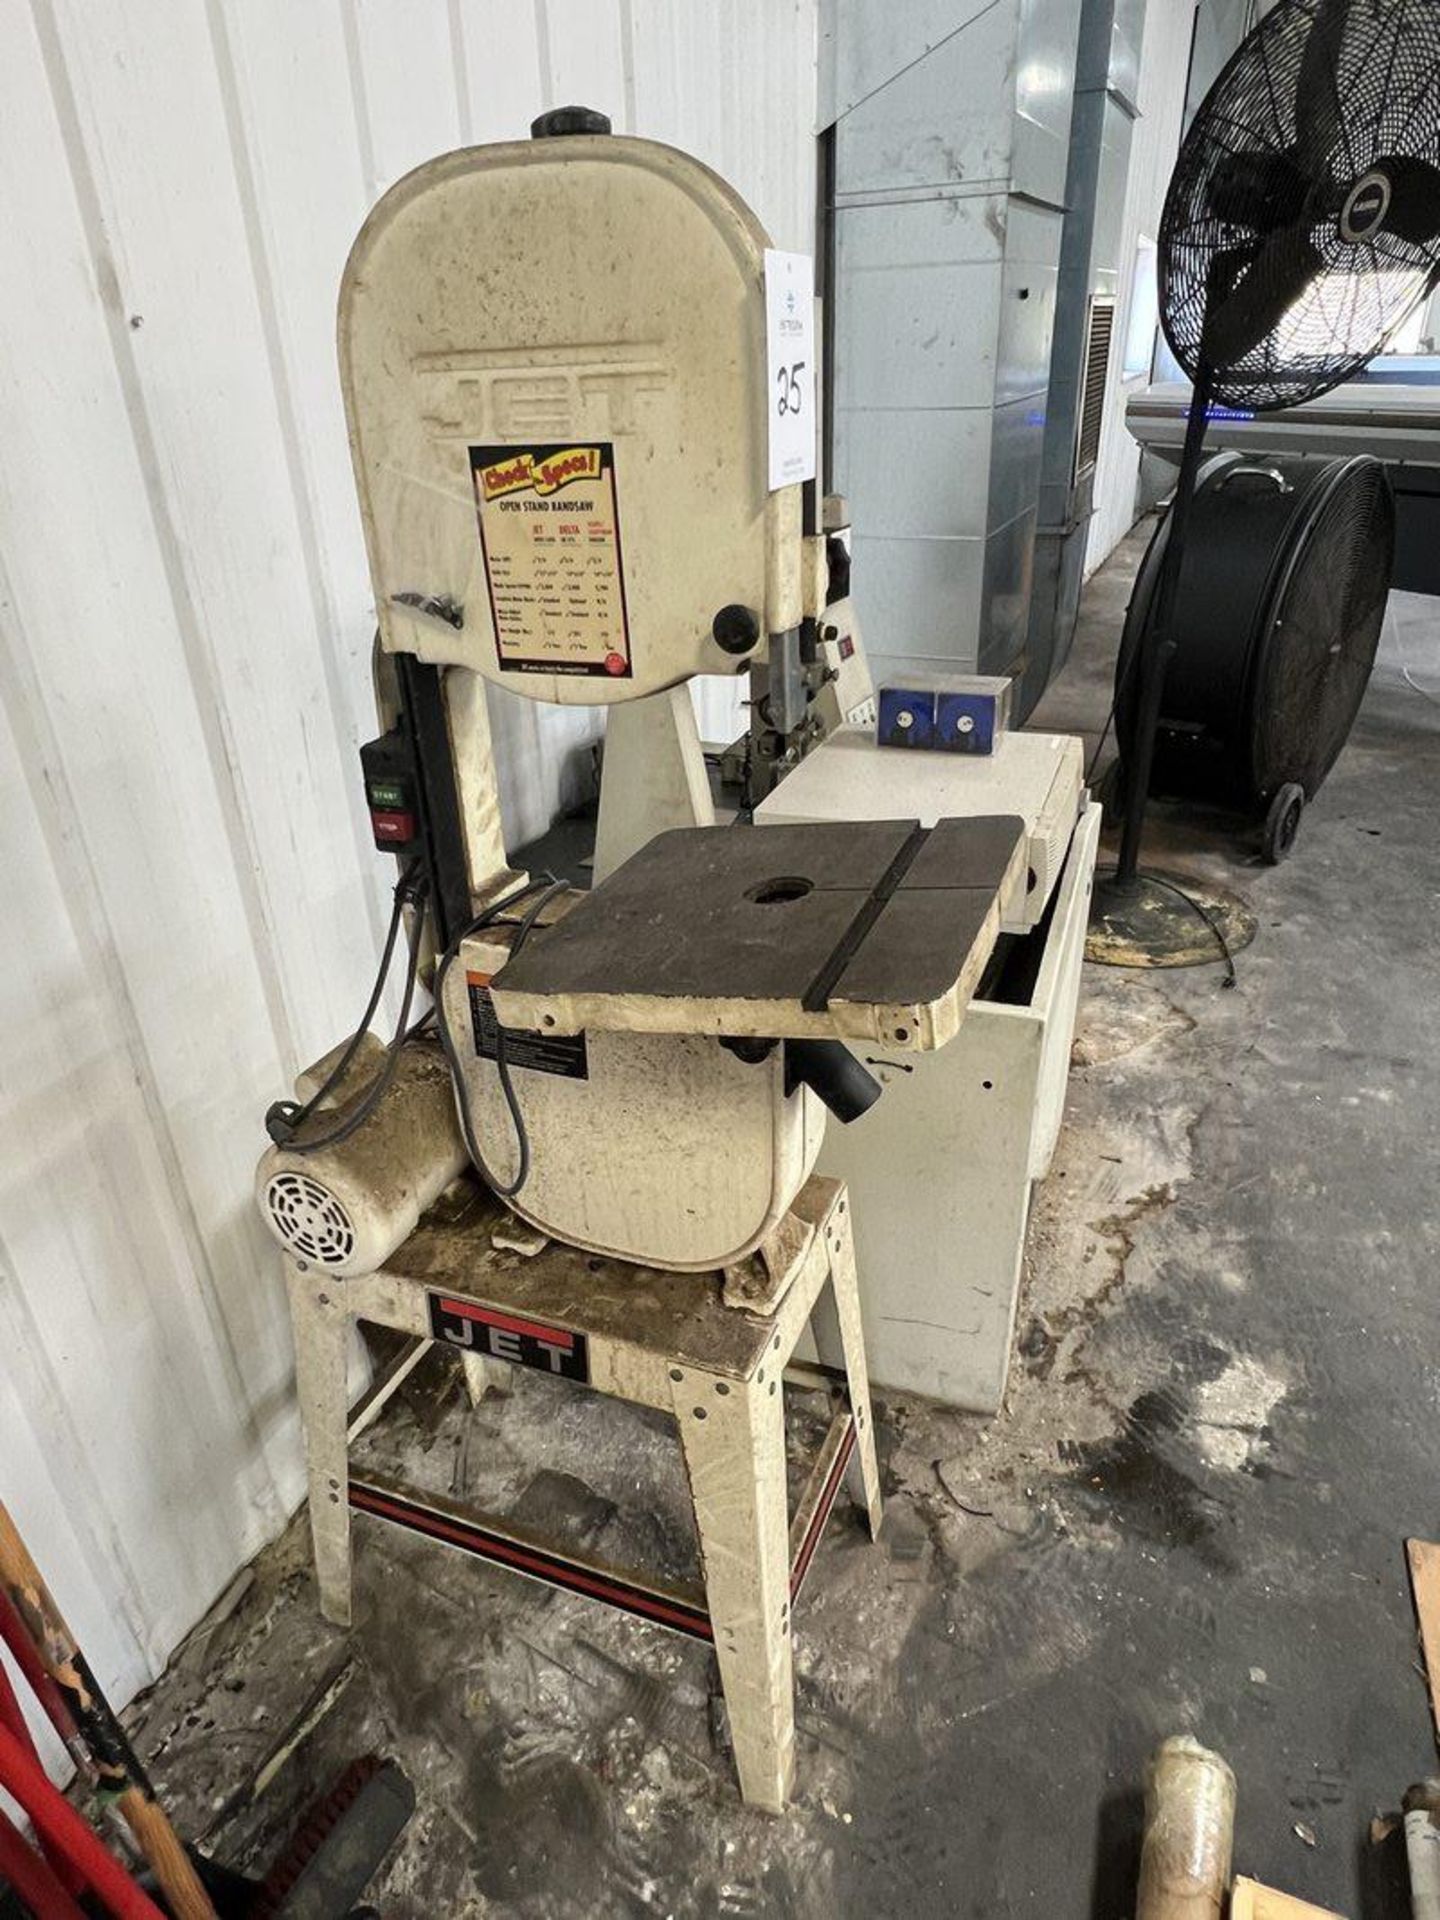 Jet JWBS-140S 14" Vertical Band Saw, S/N 10202251 - Image 2 of 3